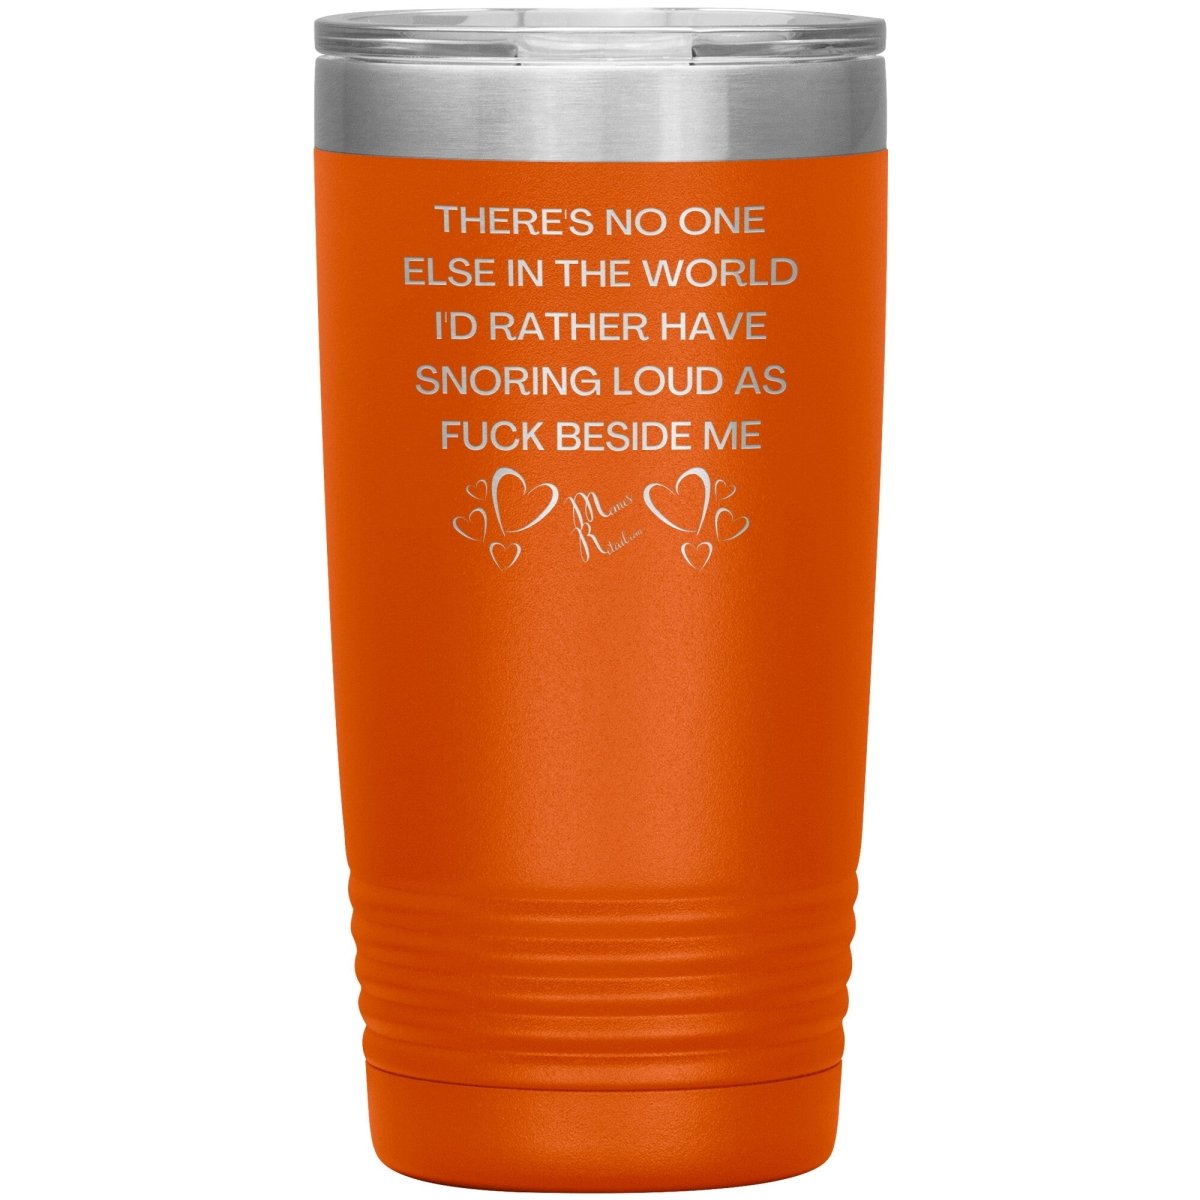 There's No One Else in the World I'd Rather Have Snoring Loud, 20oz Insulated Tumbler / Orange - MemesRetail.com